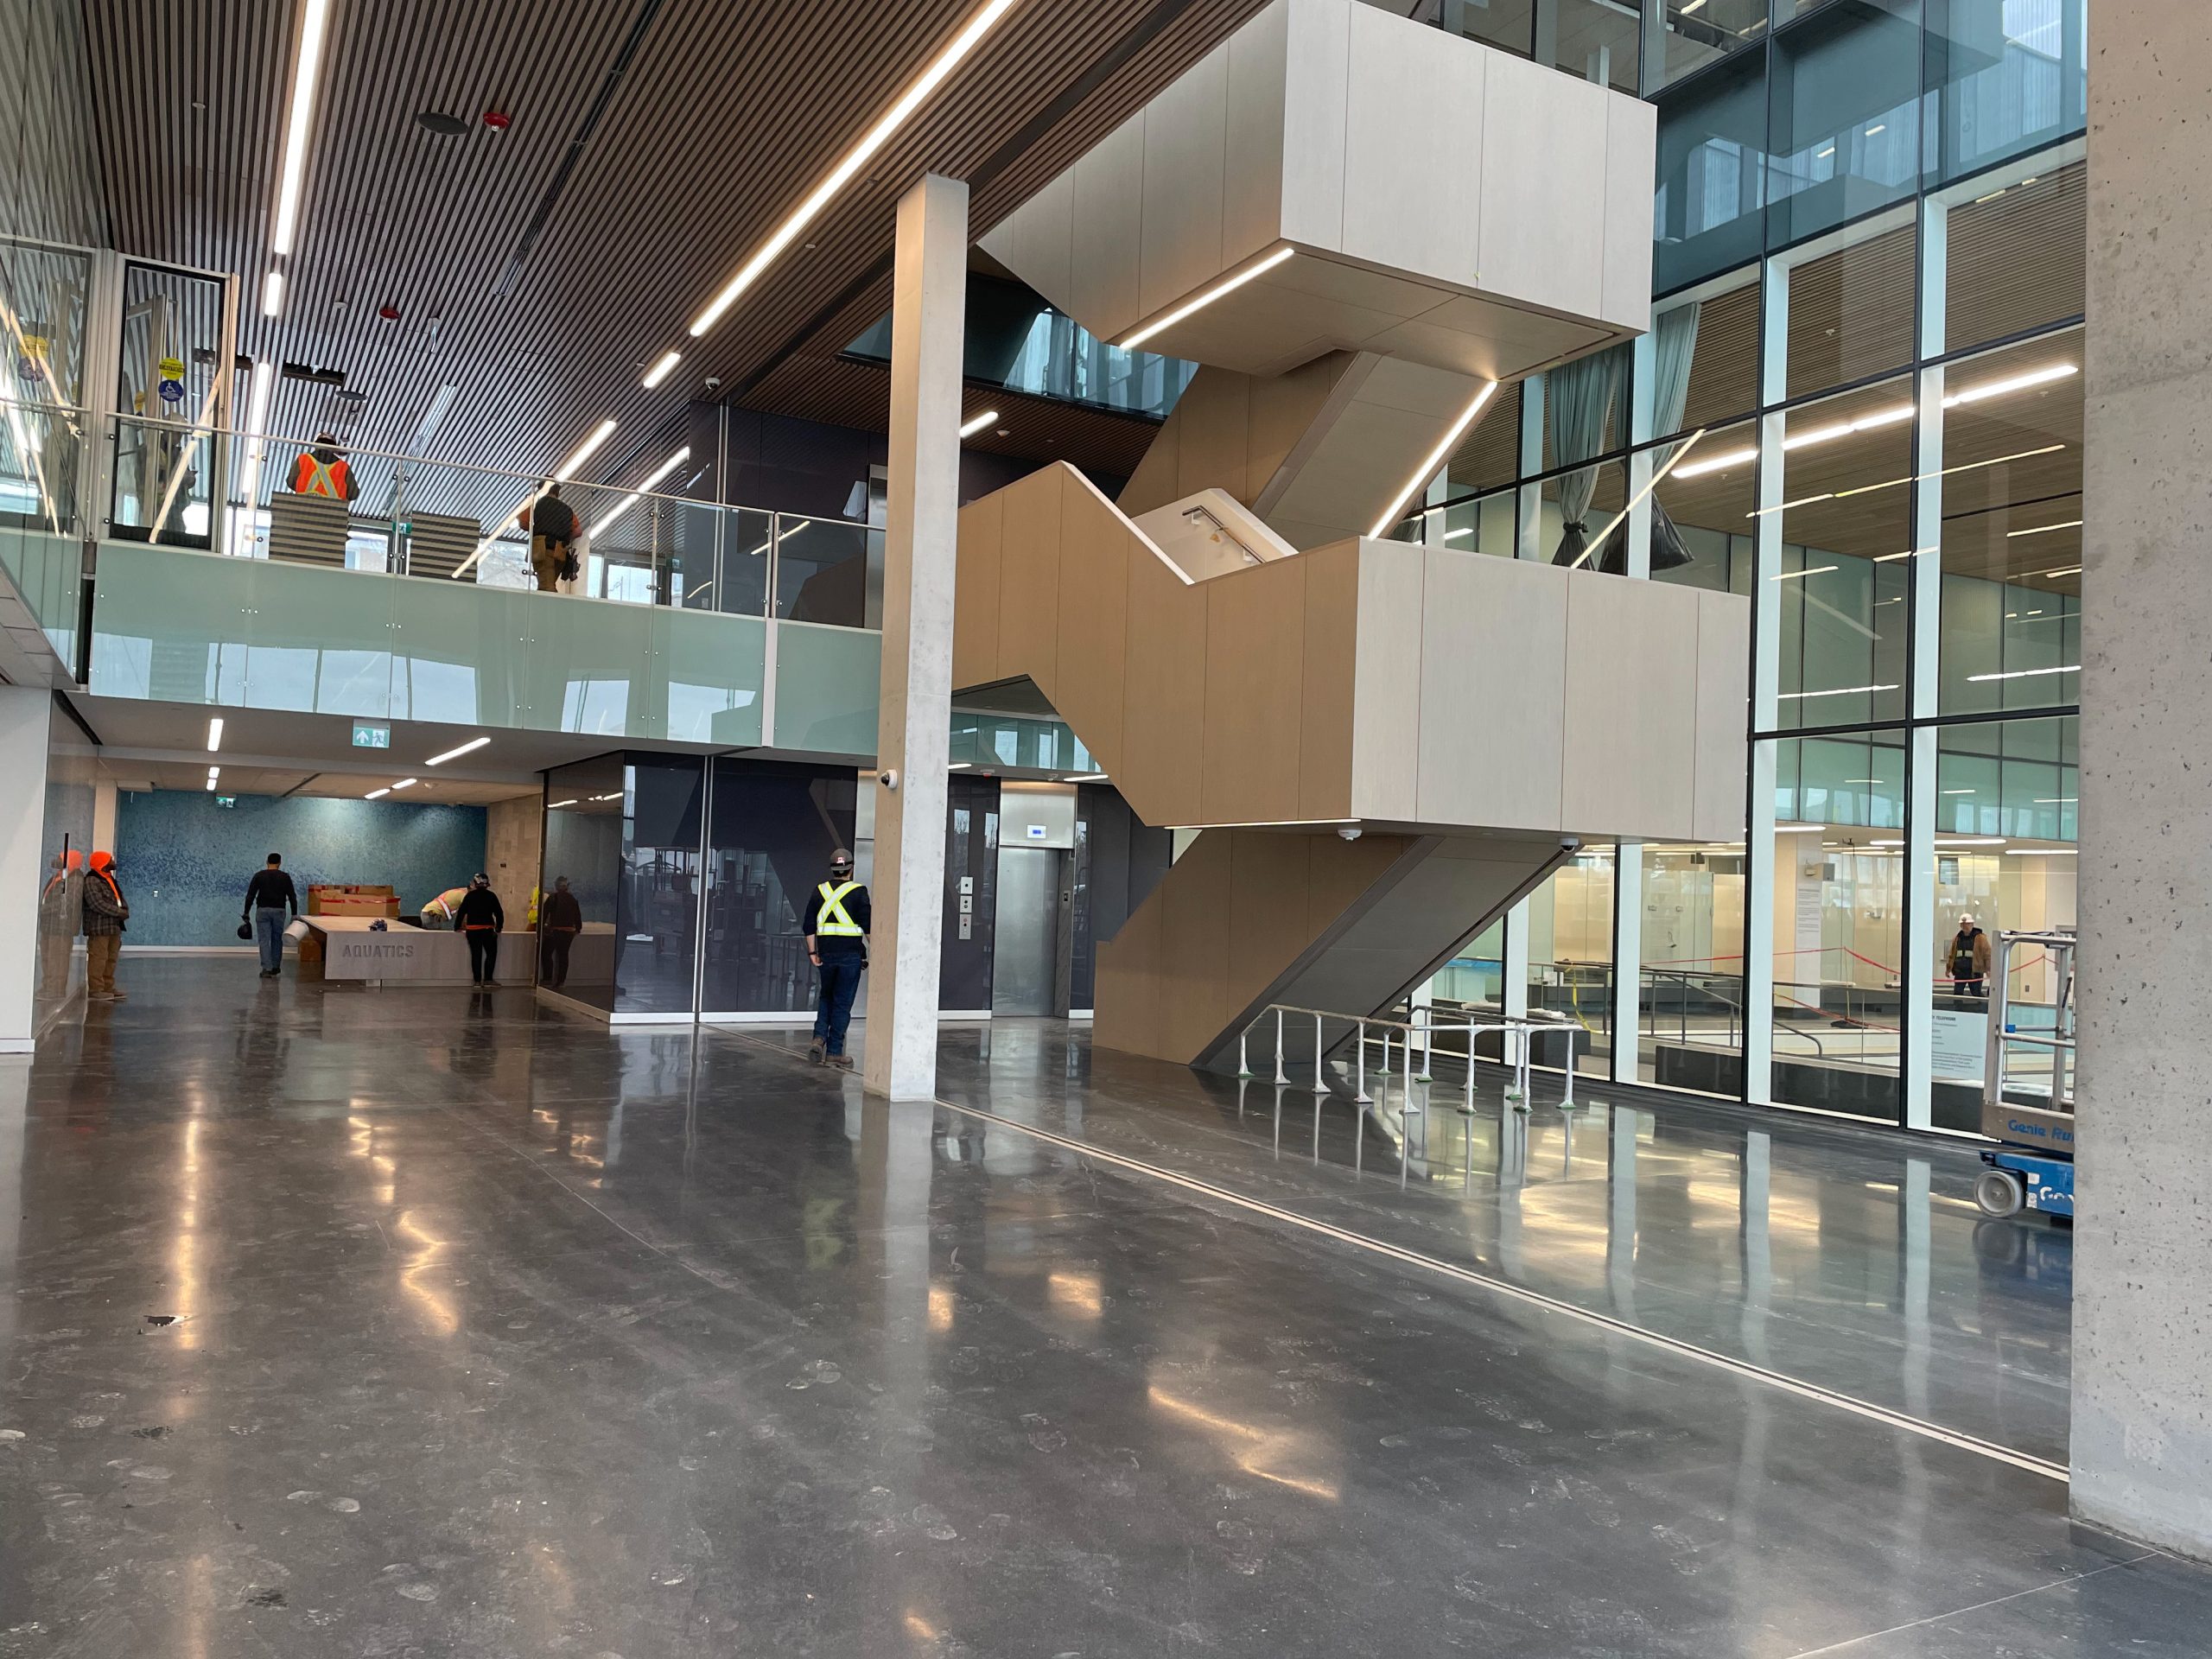 A photograph of the interior lobby area of the new Ethennonnhawahstihnen' Community Recreation Centre & Library while under construction, which shows a large feature staircase that connect the main floor and second floor. The second floor overlooks the main floor. To the left of the main level is a floor to ceiling glass wall into the swimming pool area. 